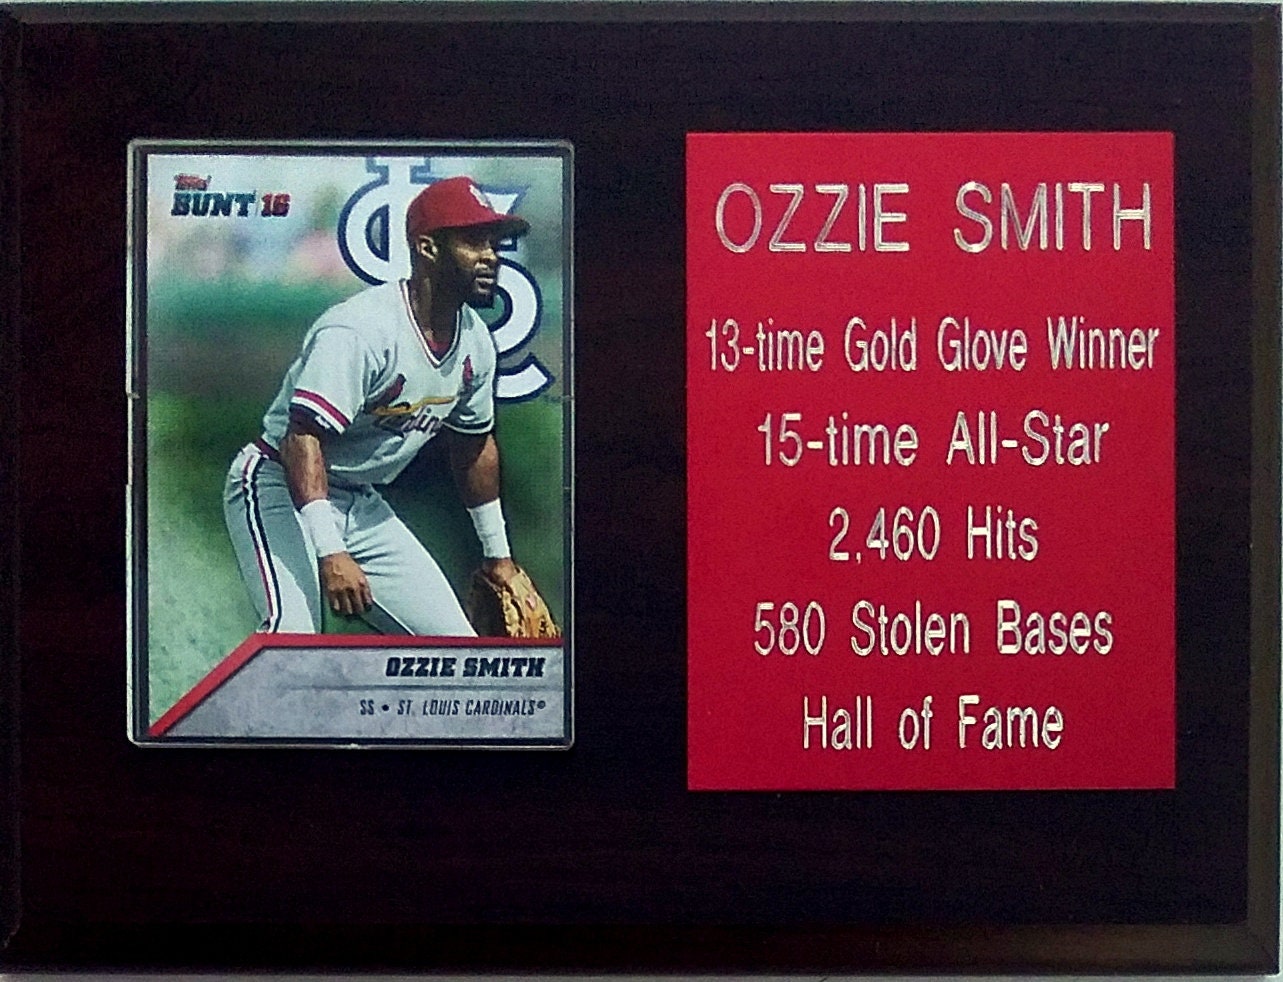 Lot Detail - OZZIE SMITH'S 2011 ST. LOUIS CARDINALS WORLD SERIES RING IN  ORIGINAL PRESENTATION BOX